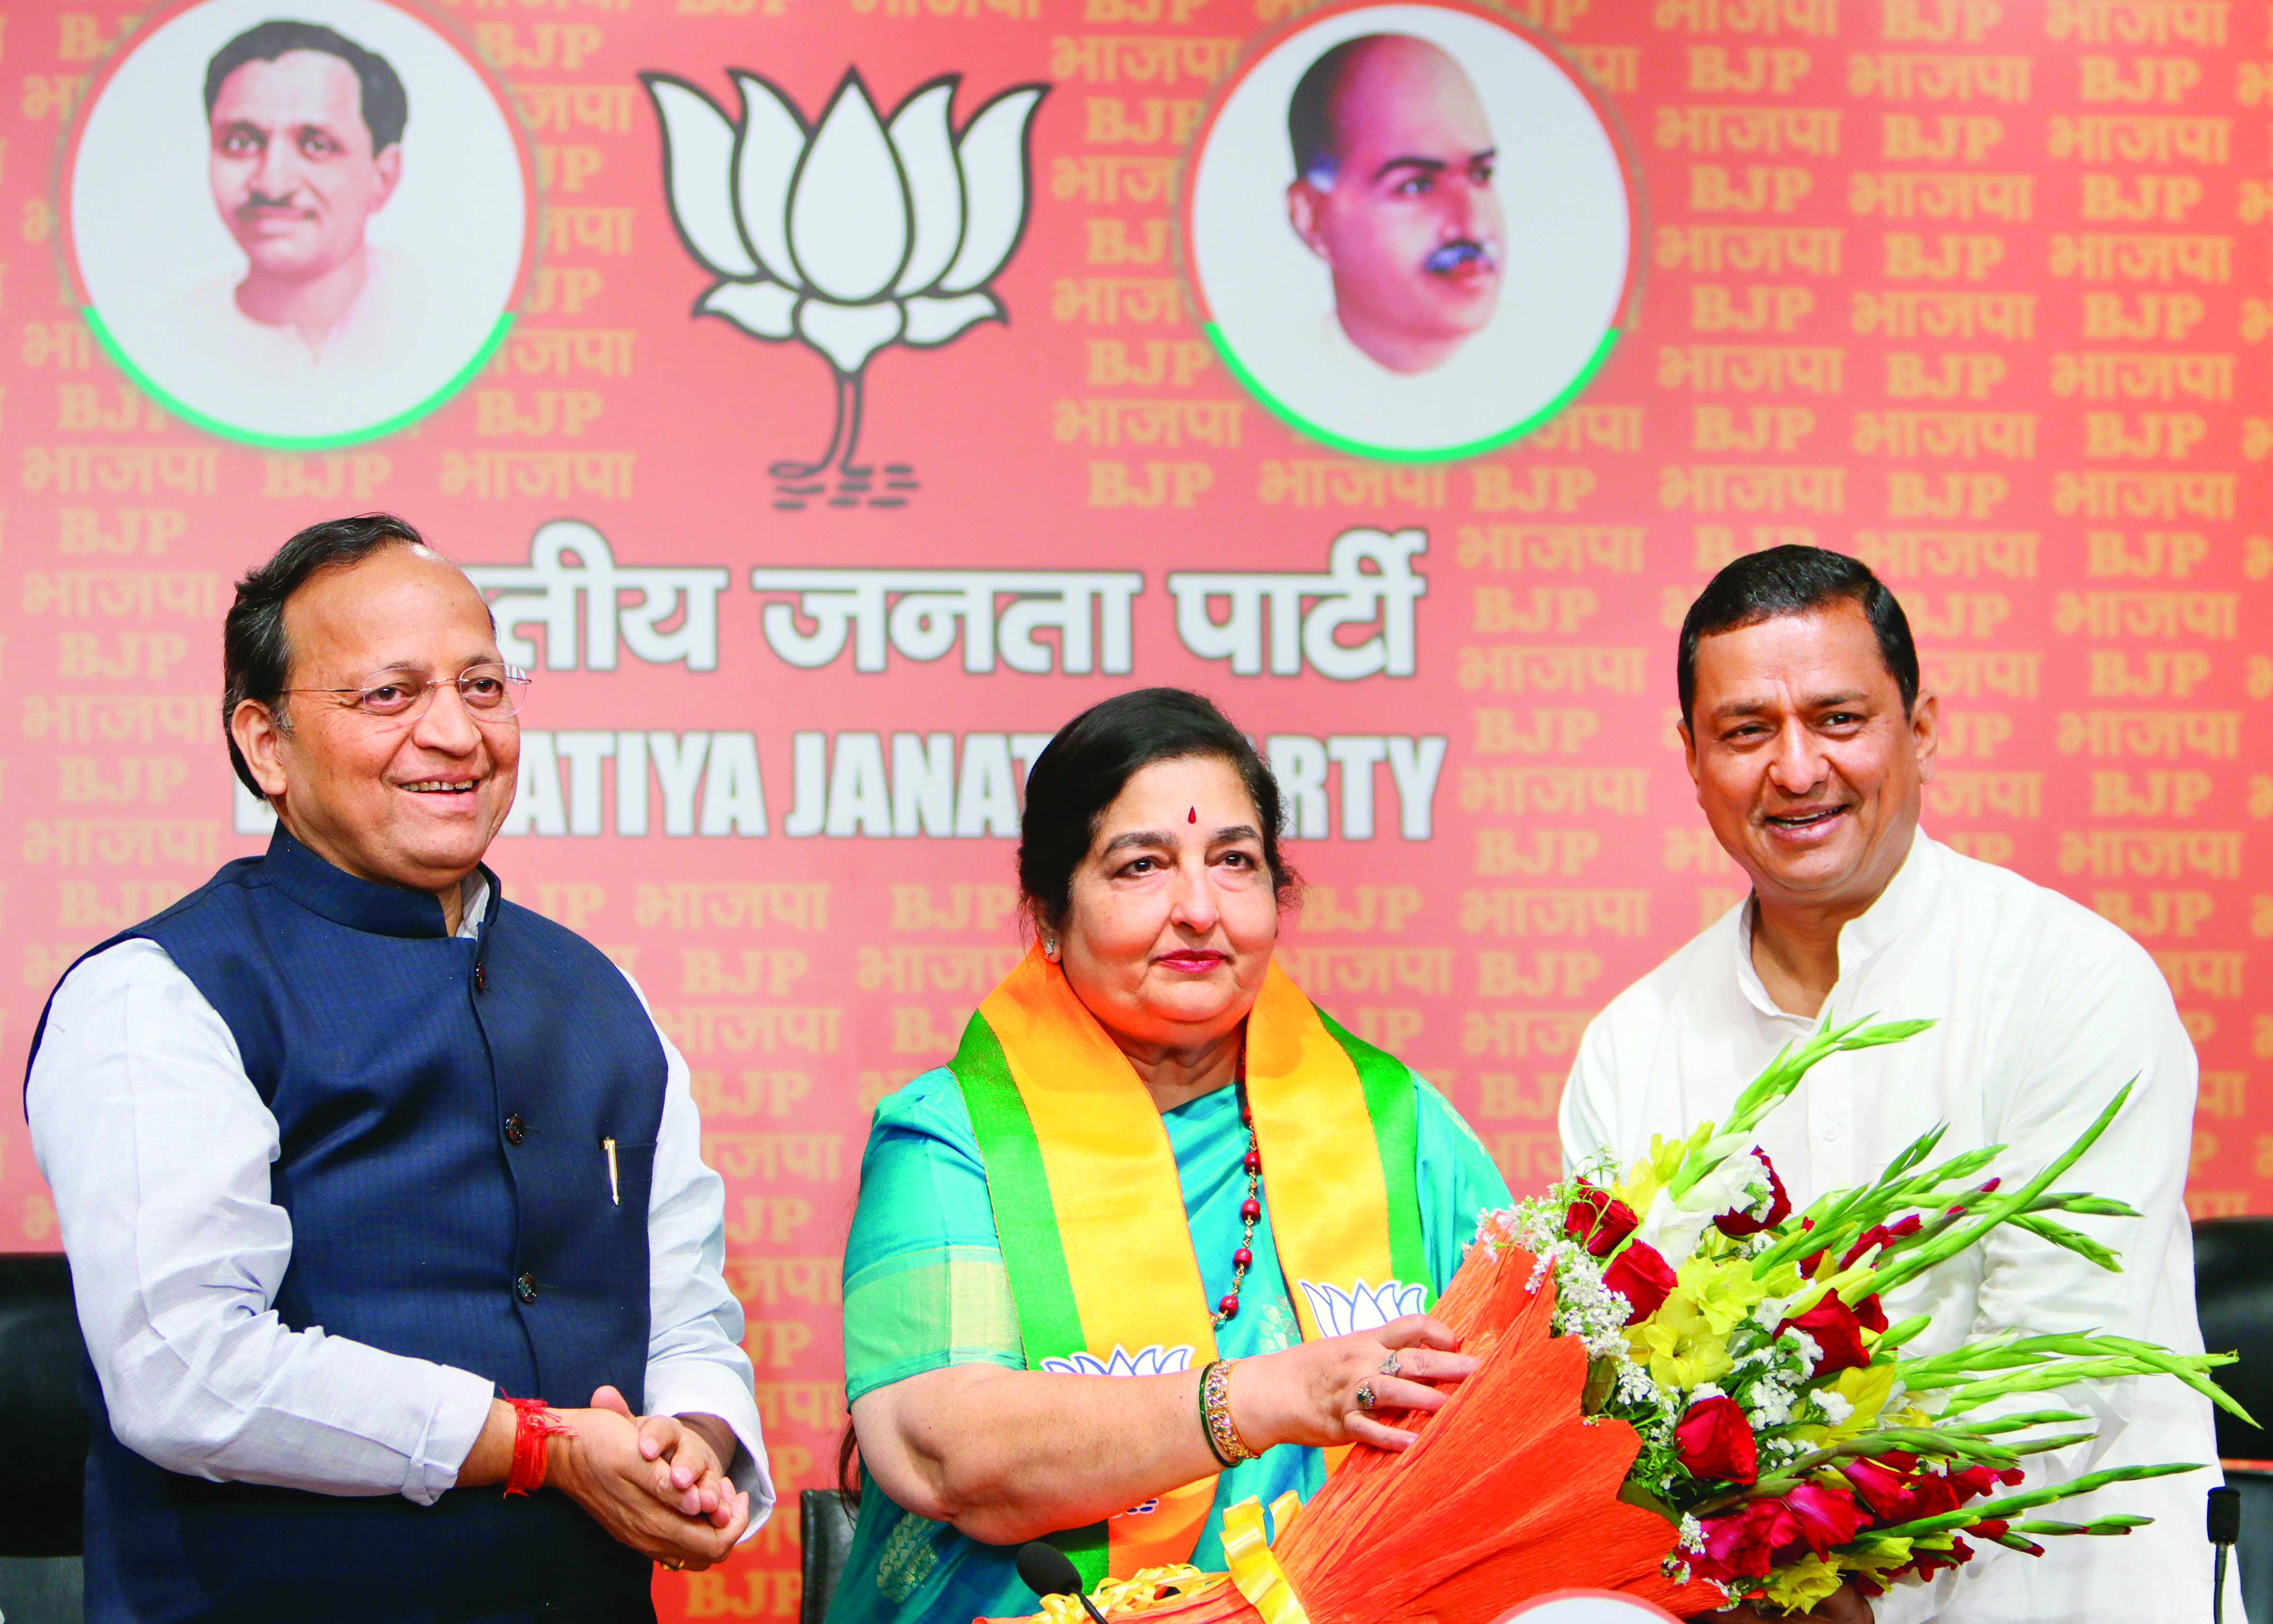 Noted Bollywood singer Anuradha joins BJP; ex-MP Jithender Reddy quits BJP, joins Cong